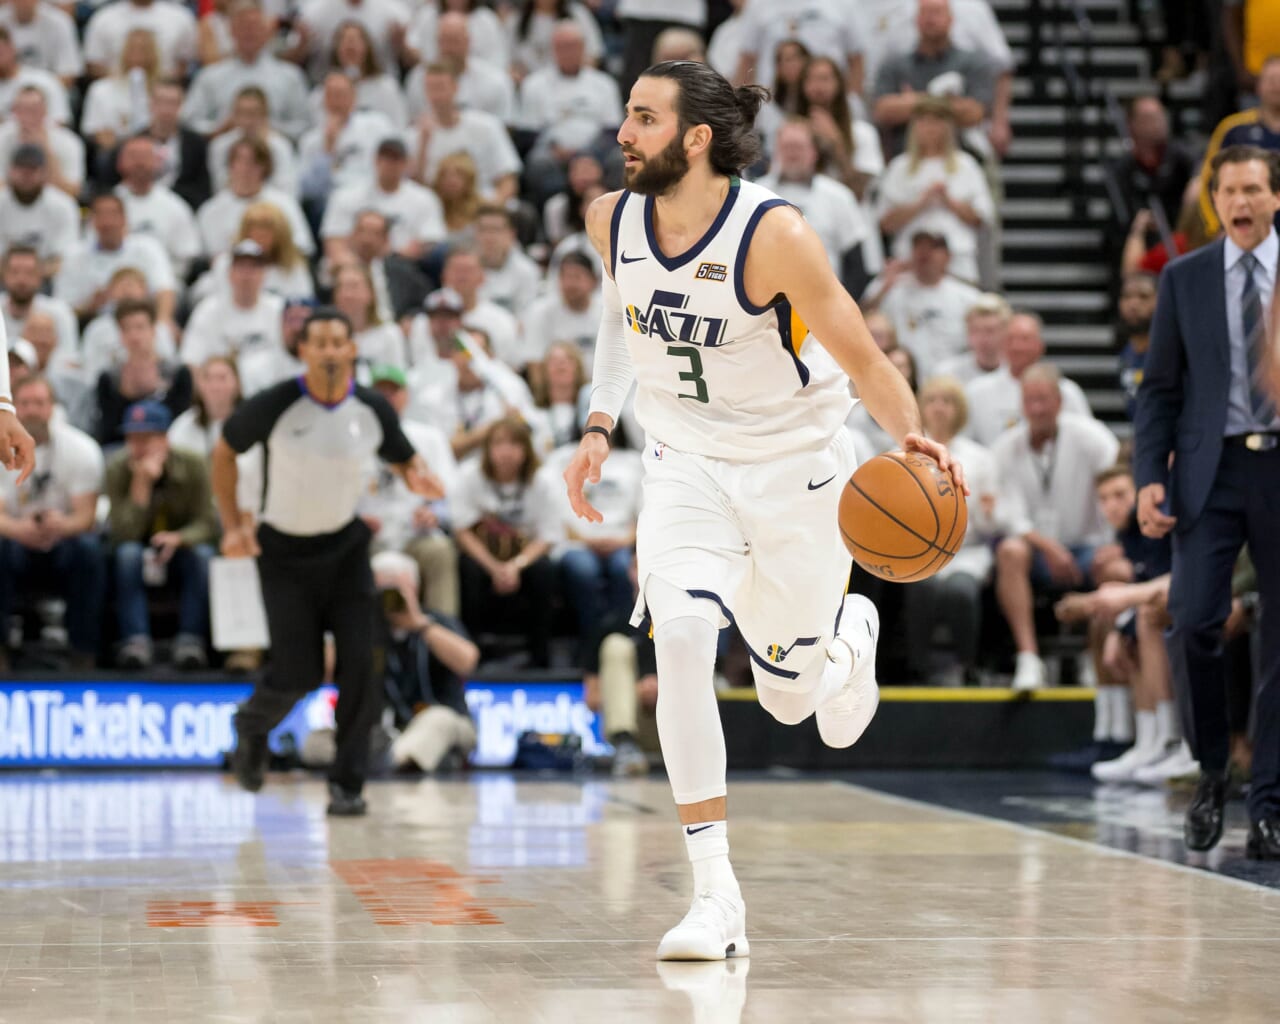 Should The New York Knicks Pursue Ricky Rubio In Free Agency?